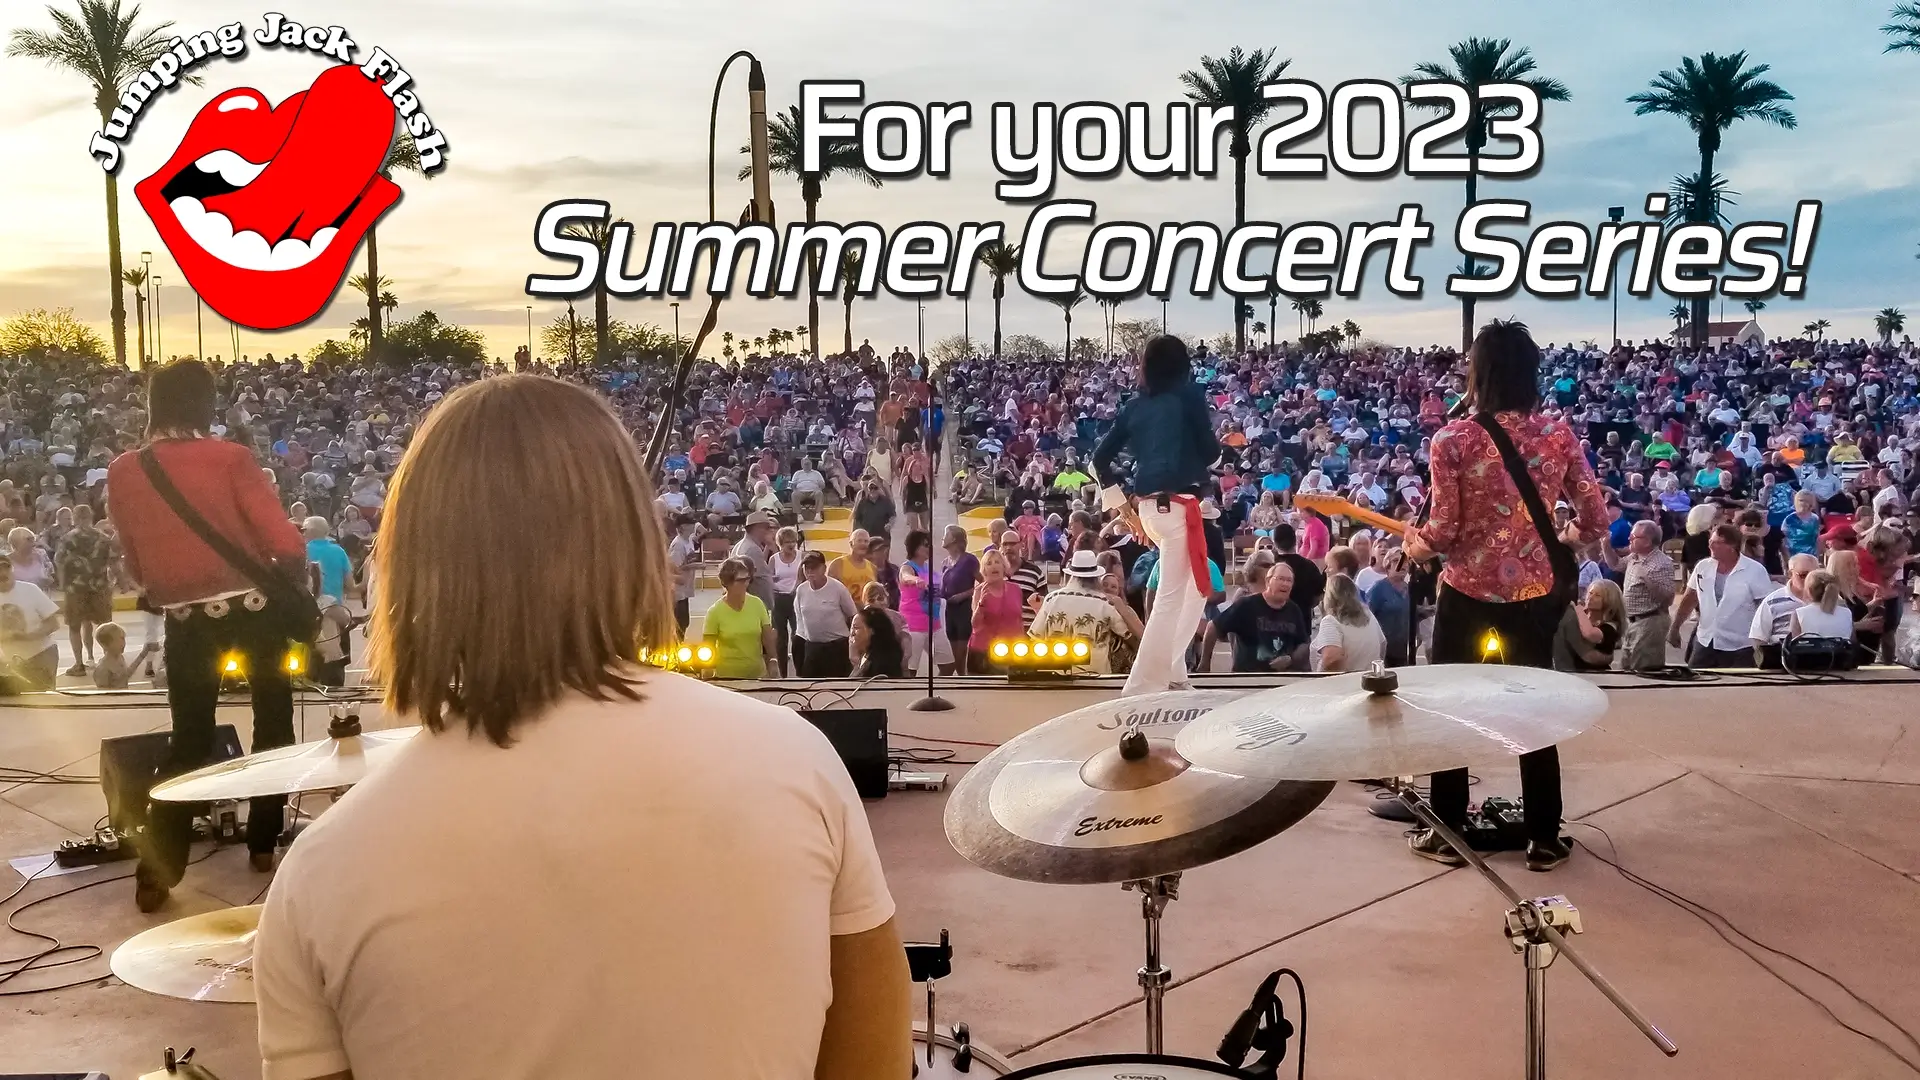 Book Jumping Jack Flash for 2023 Summer Concert Series